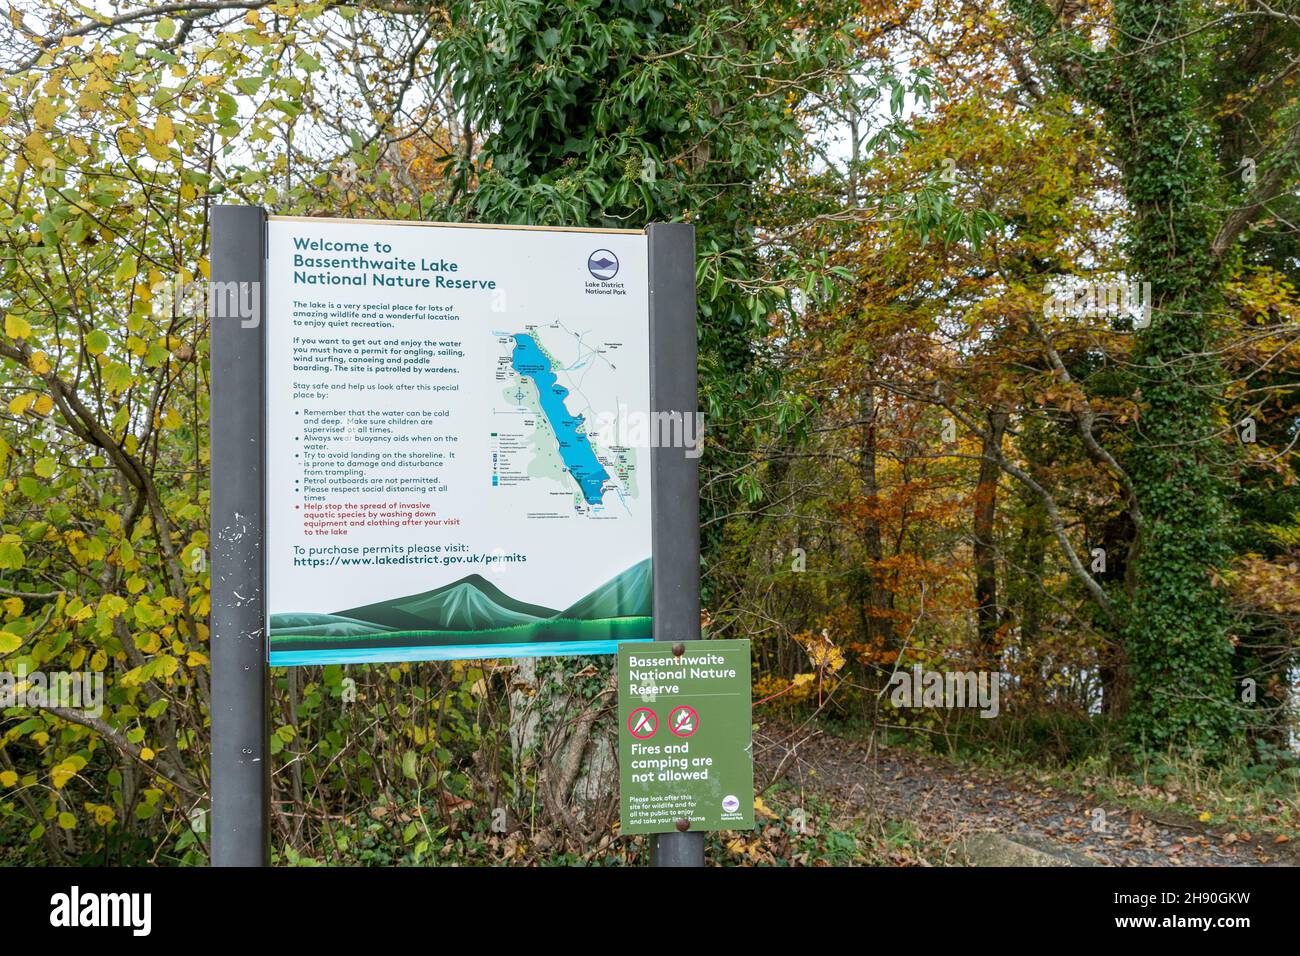 Information board at Bassenthwaite Lake National Nature Reserve in the Lake District National Park, Cumbria, England, UK Stock Photo